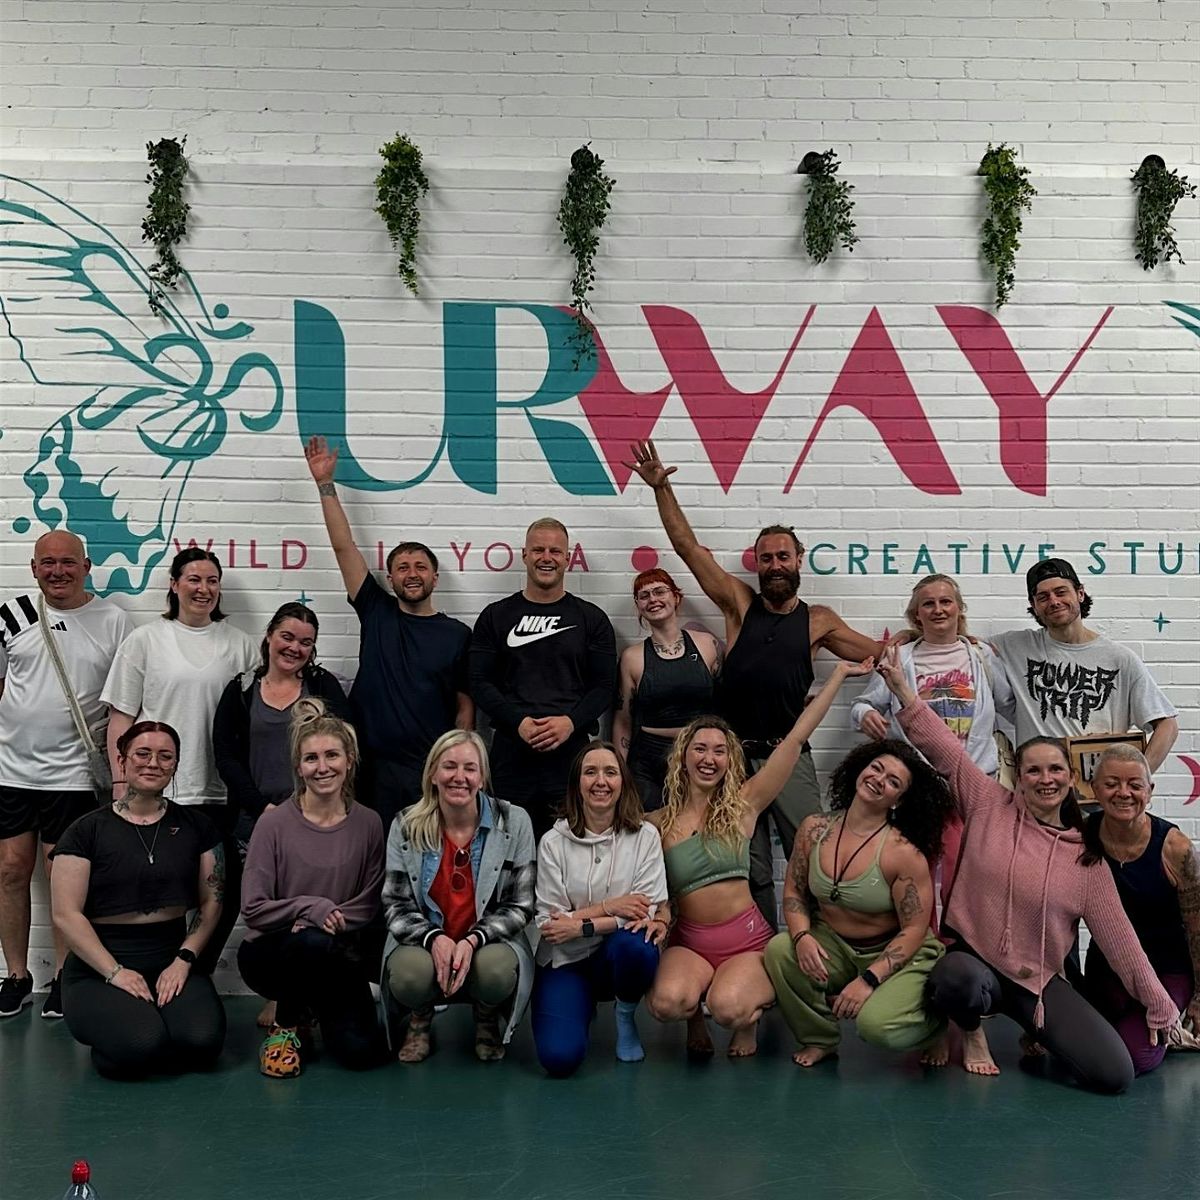 All levels yoga class URWAY